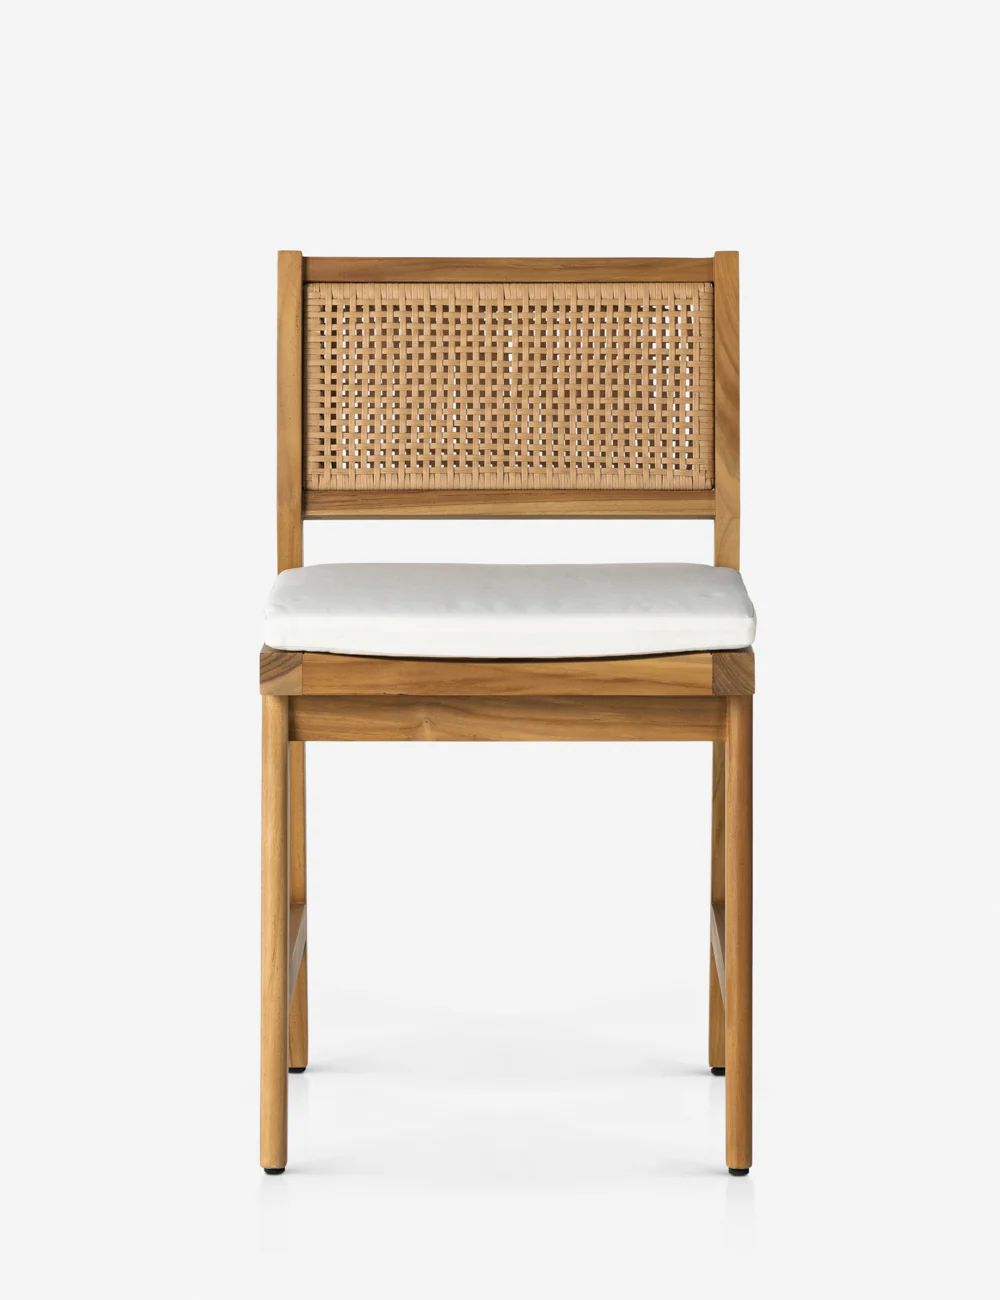 Anson Indoor / Outdoor Dining Chair | Lulu and Georgia 